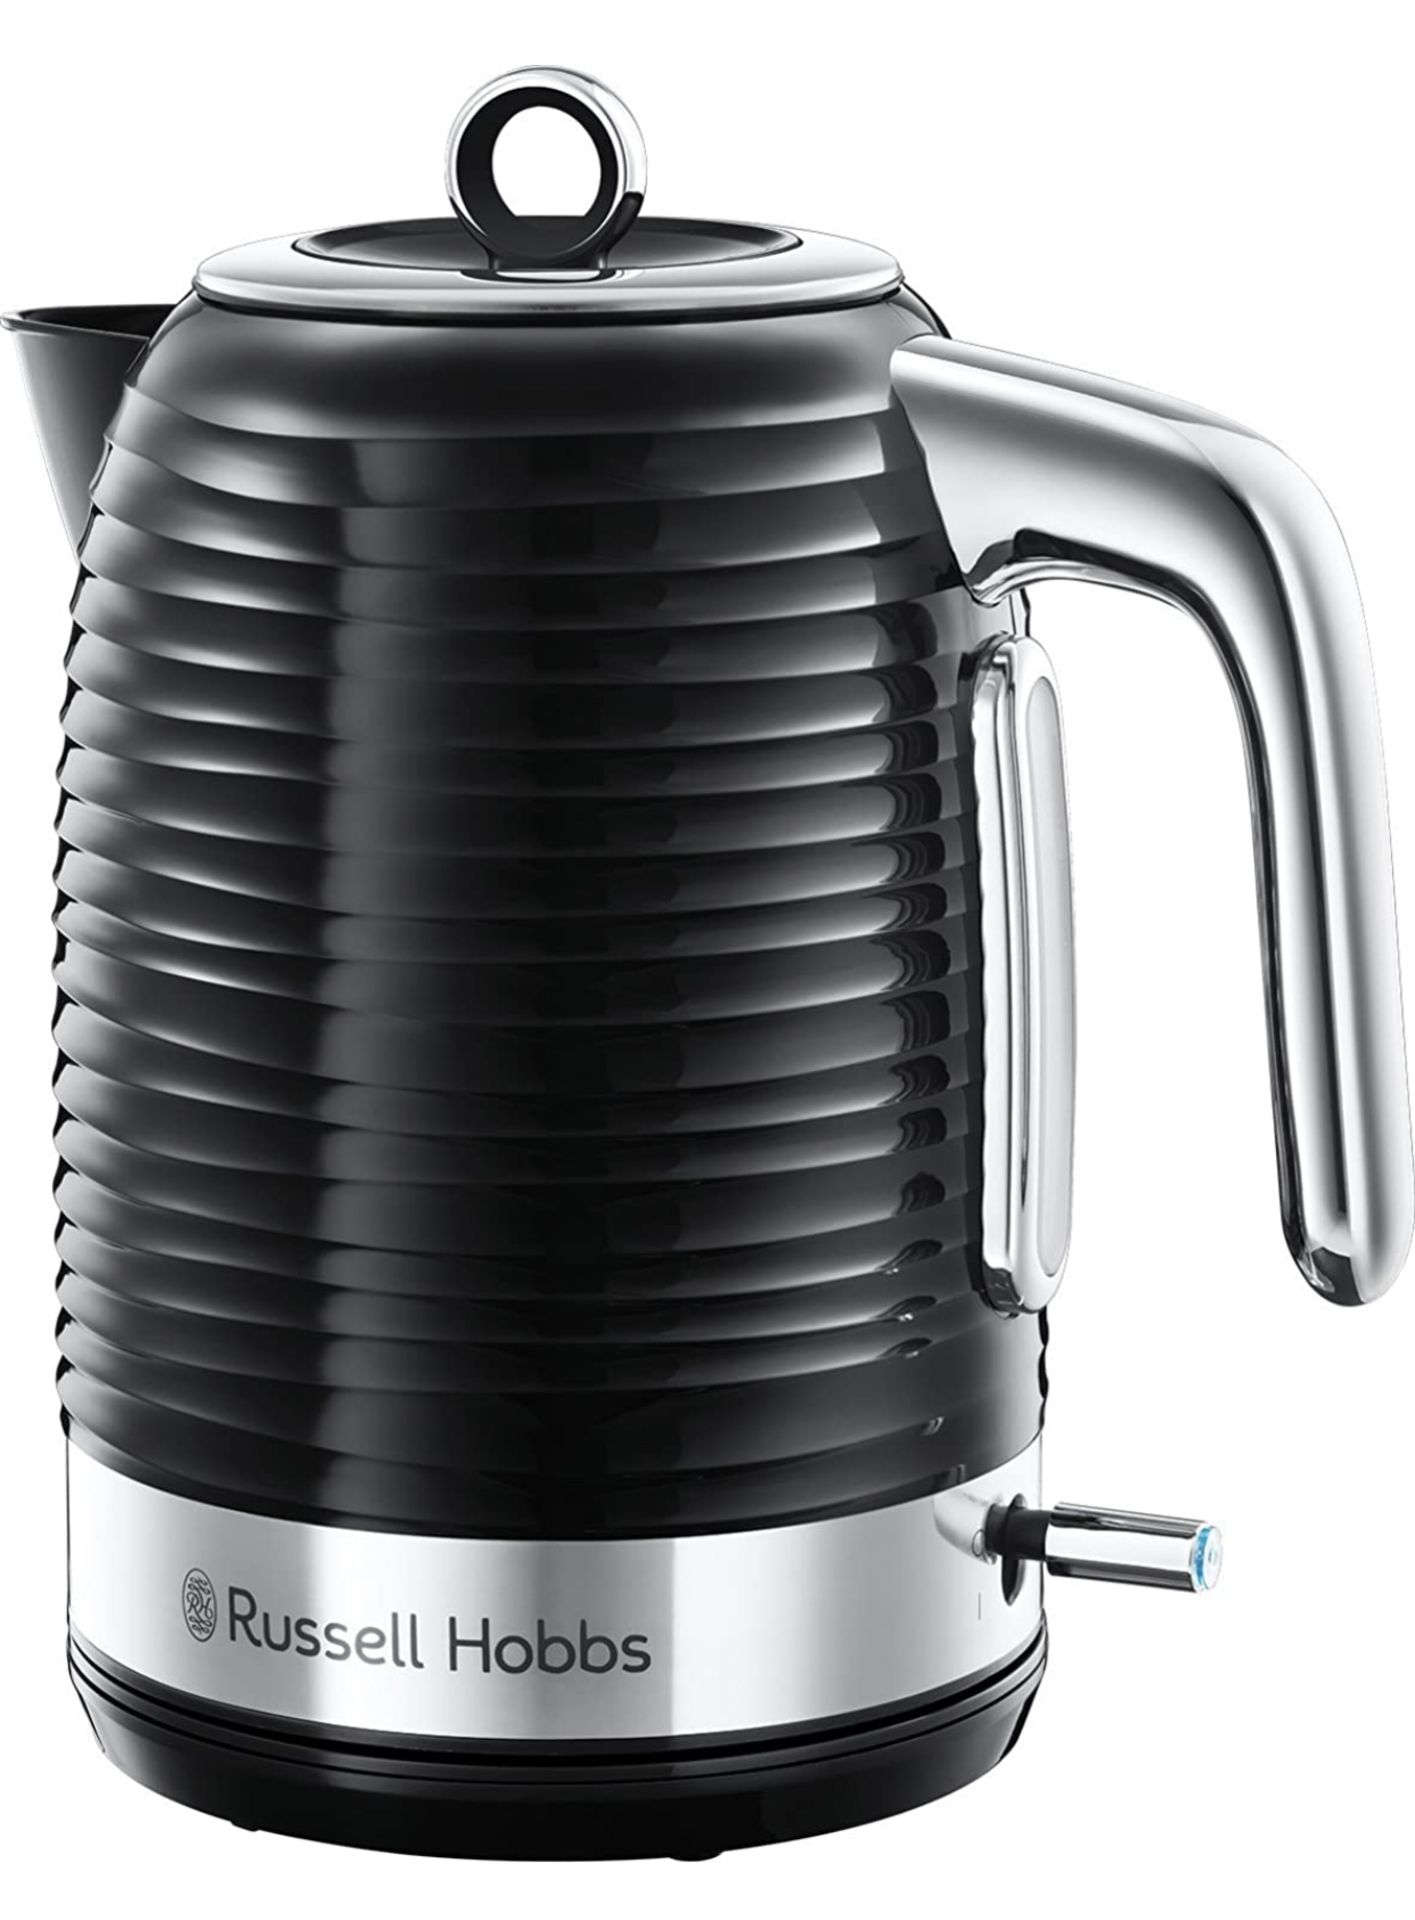 Russell Hobbs 24361 Inspire Electric Fast Boil Kettle RRP £34.99